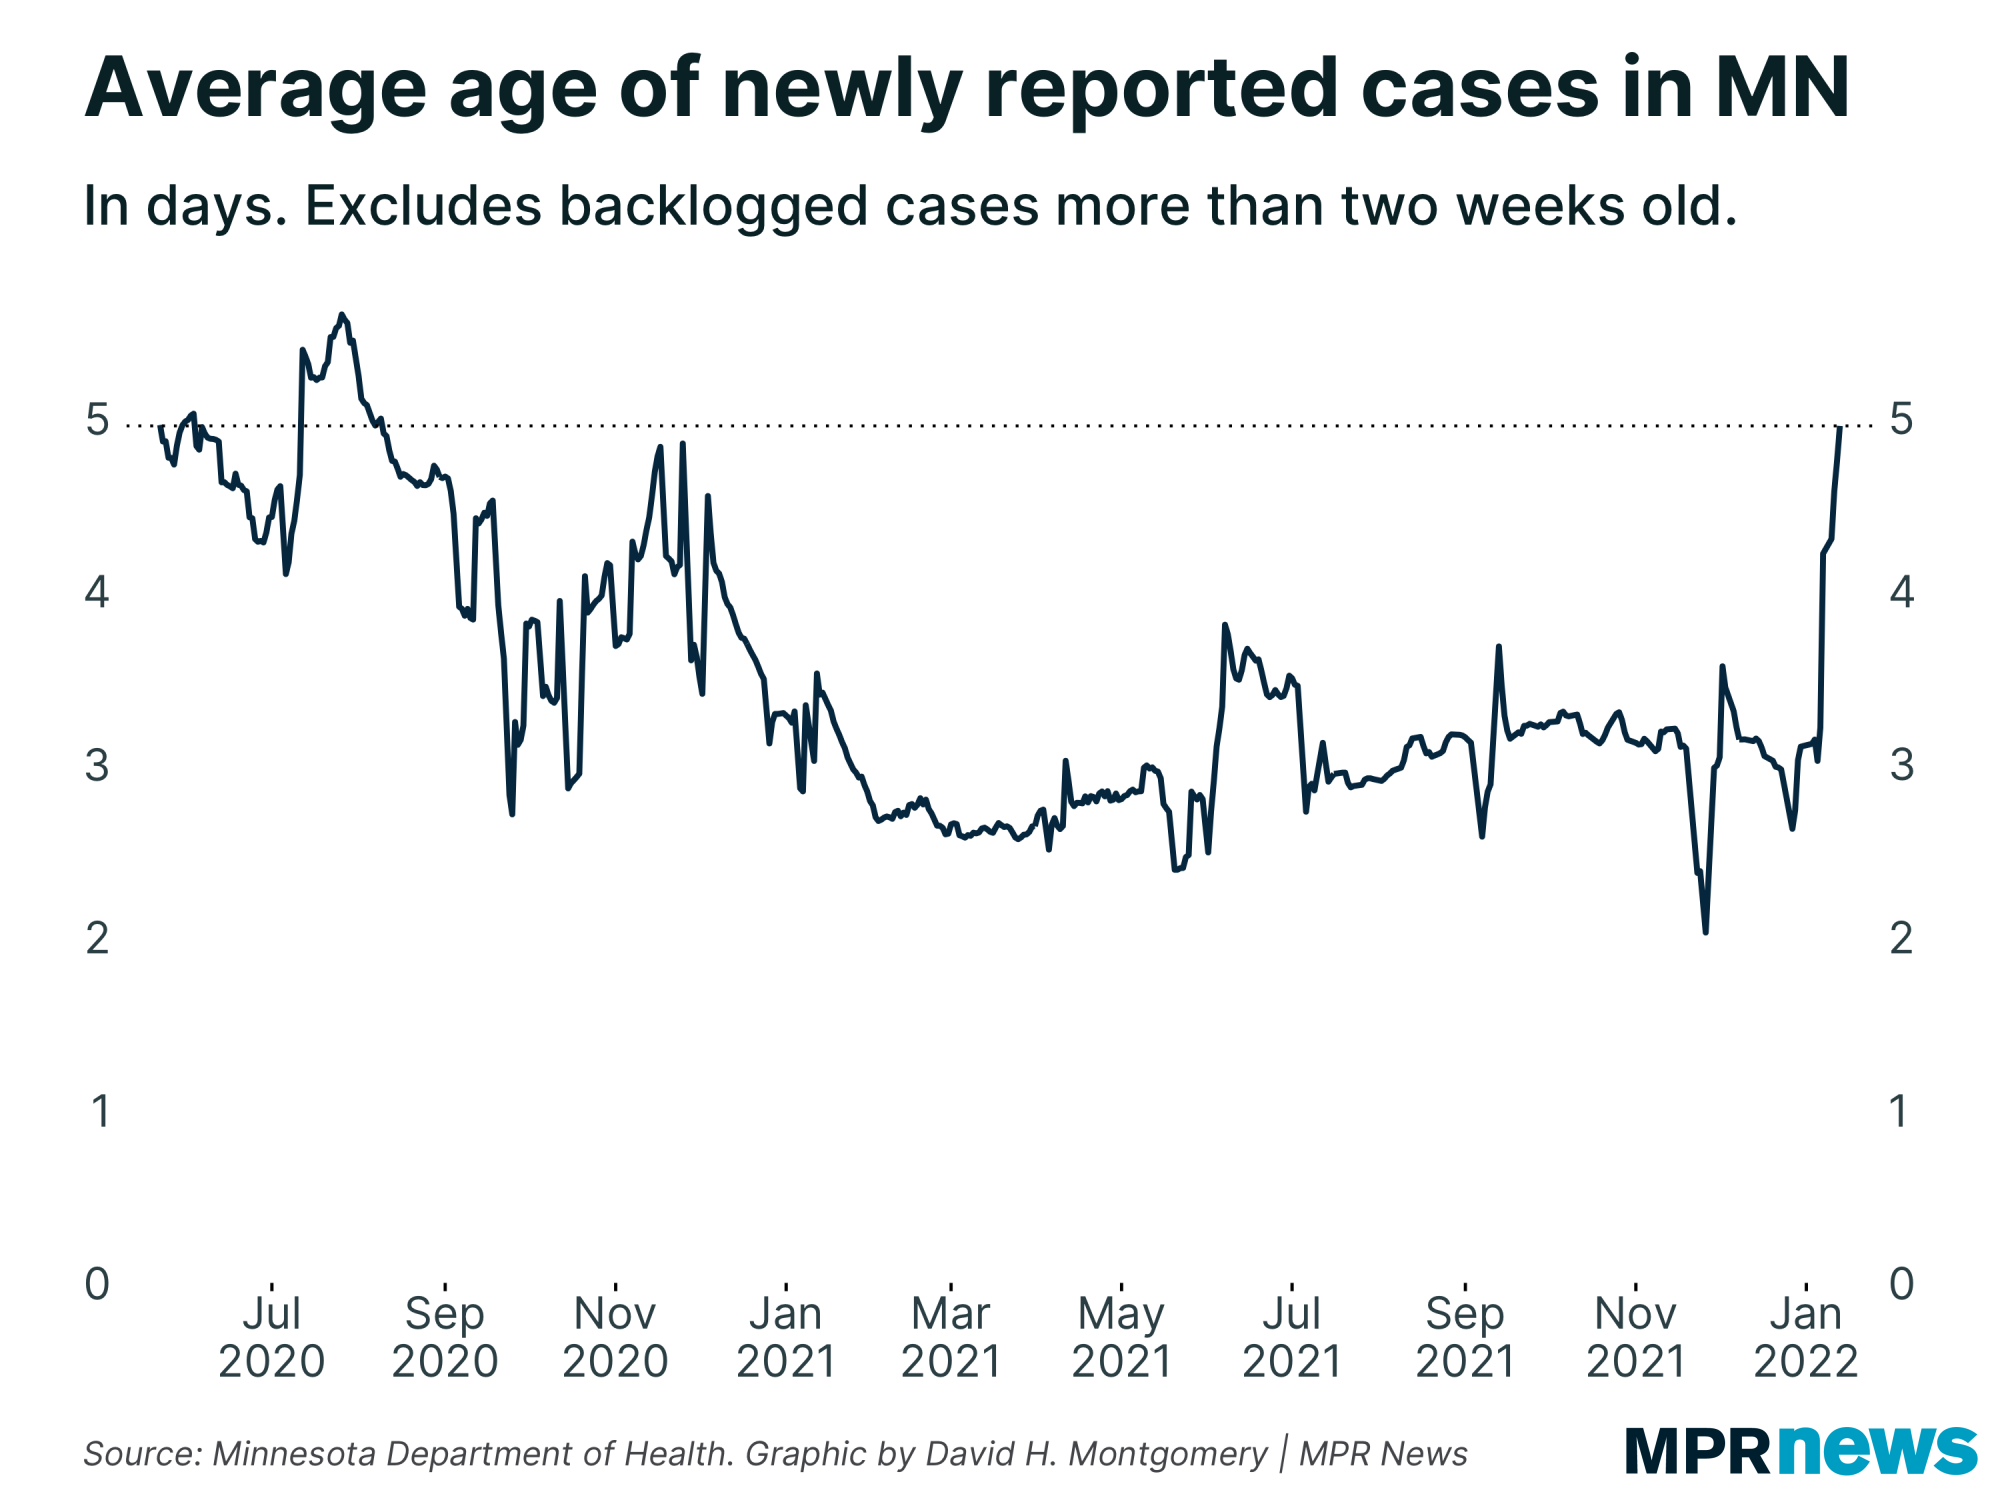 Graph of the average delay of newly reported cases in Minnesota